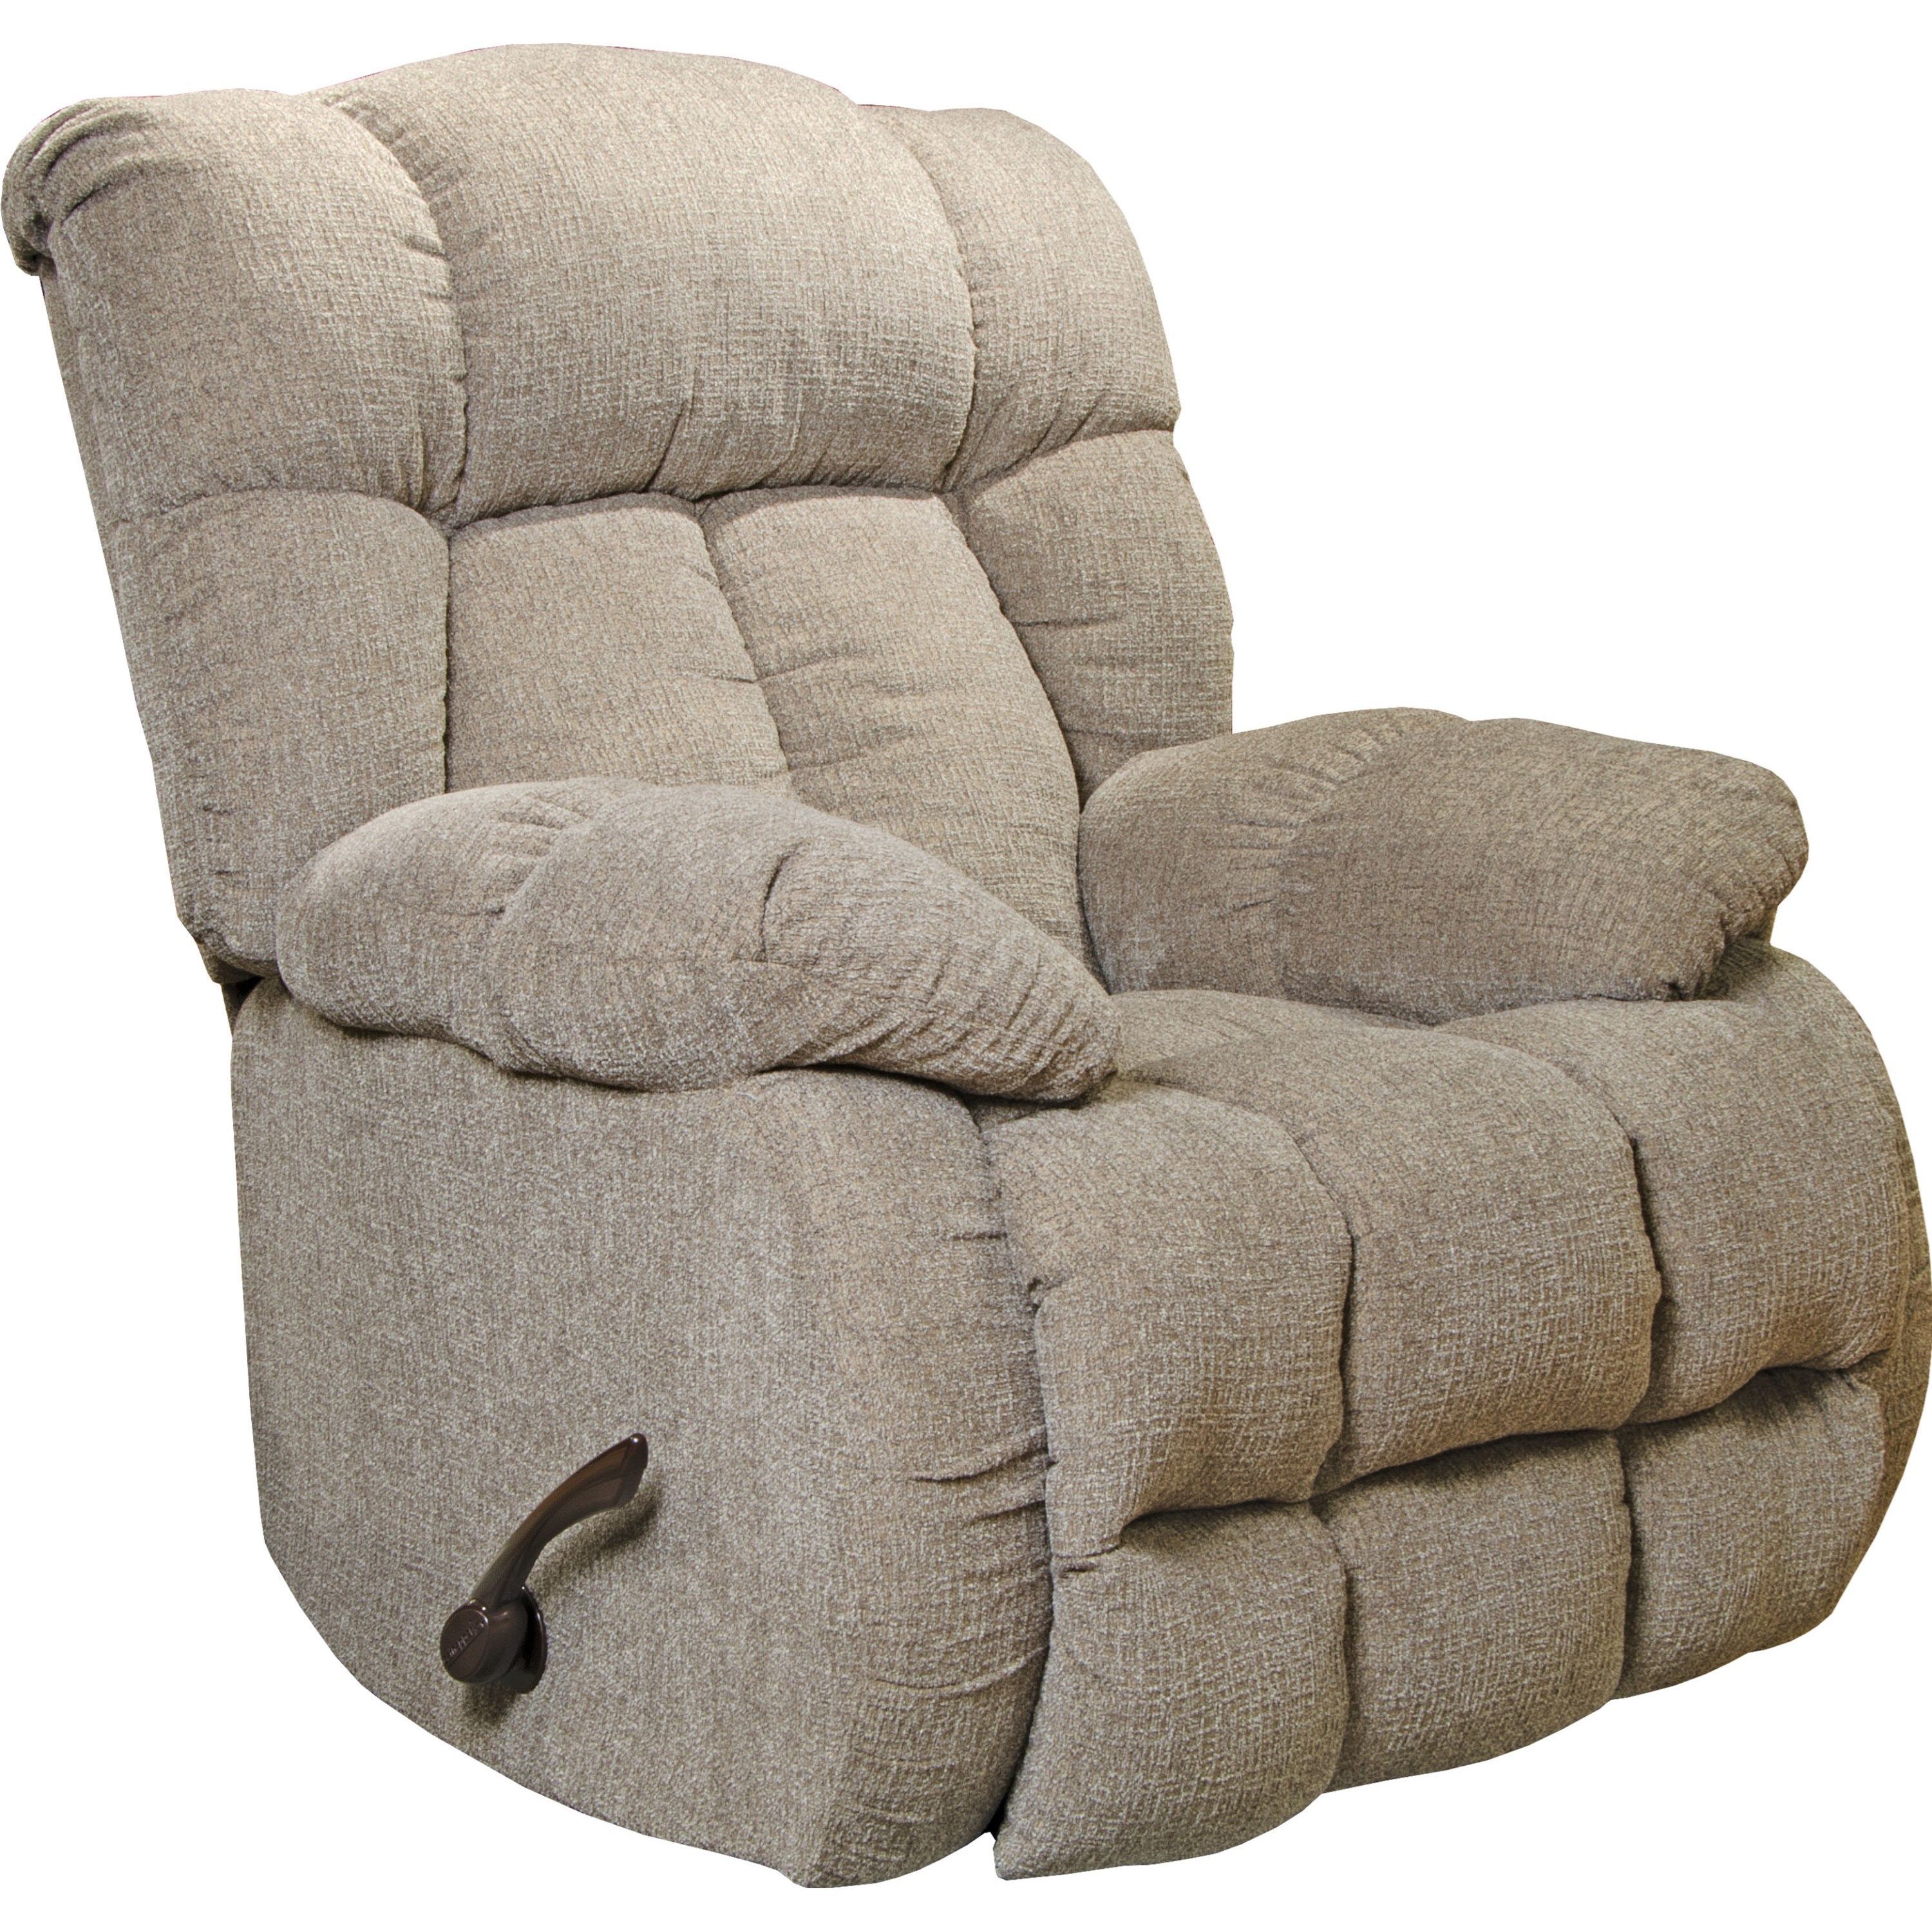 Catnapper Motion Chairs And Recliners Brody Rocker Recliner Throughout Gibson Swivel Cuddler Chairs (View 3 of 20)